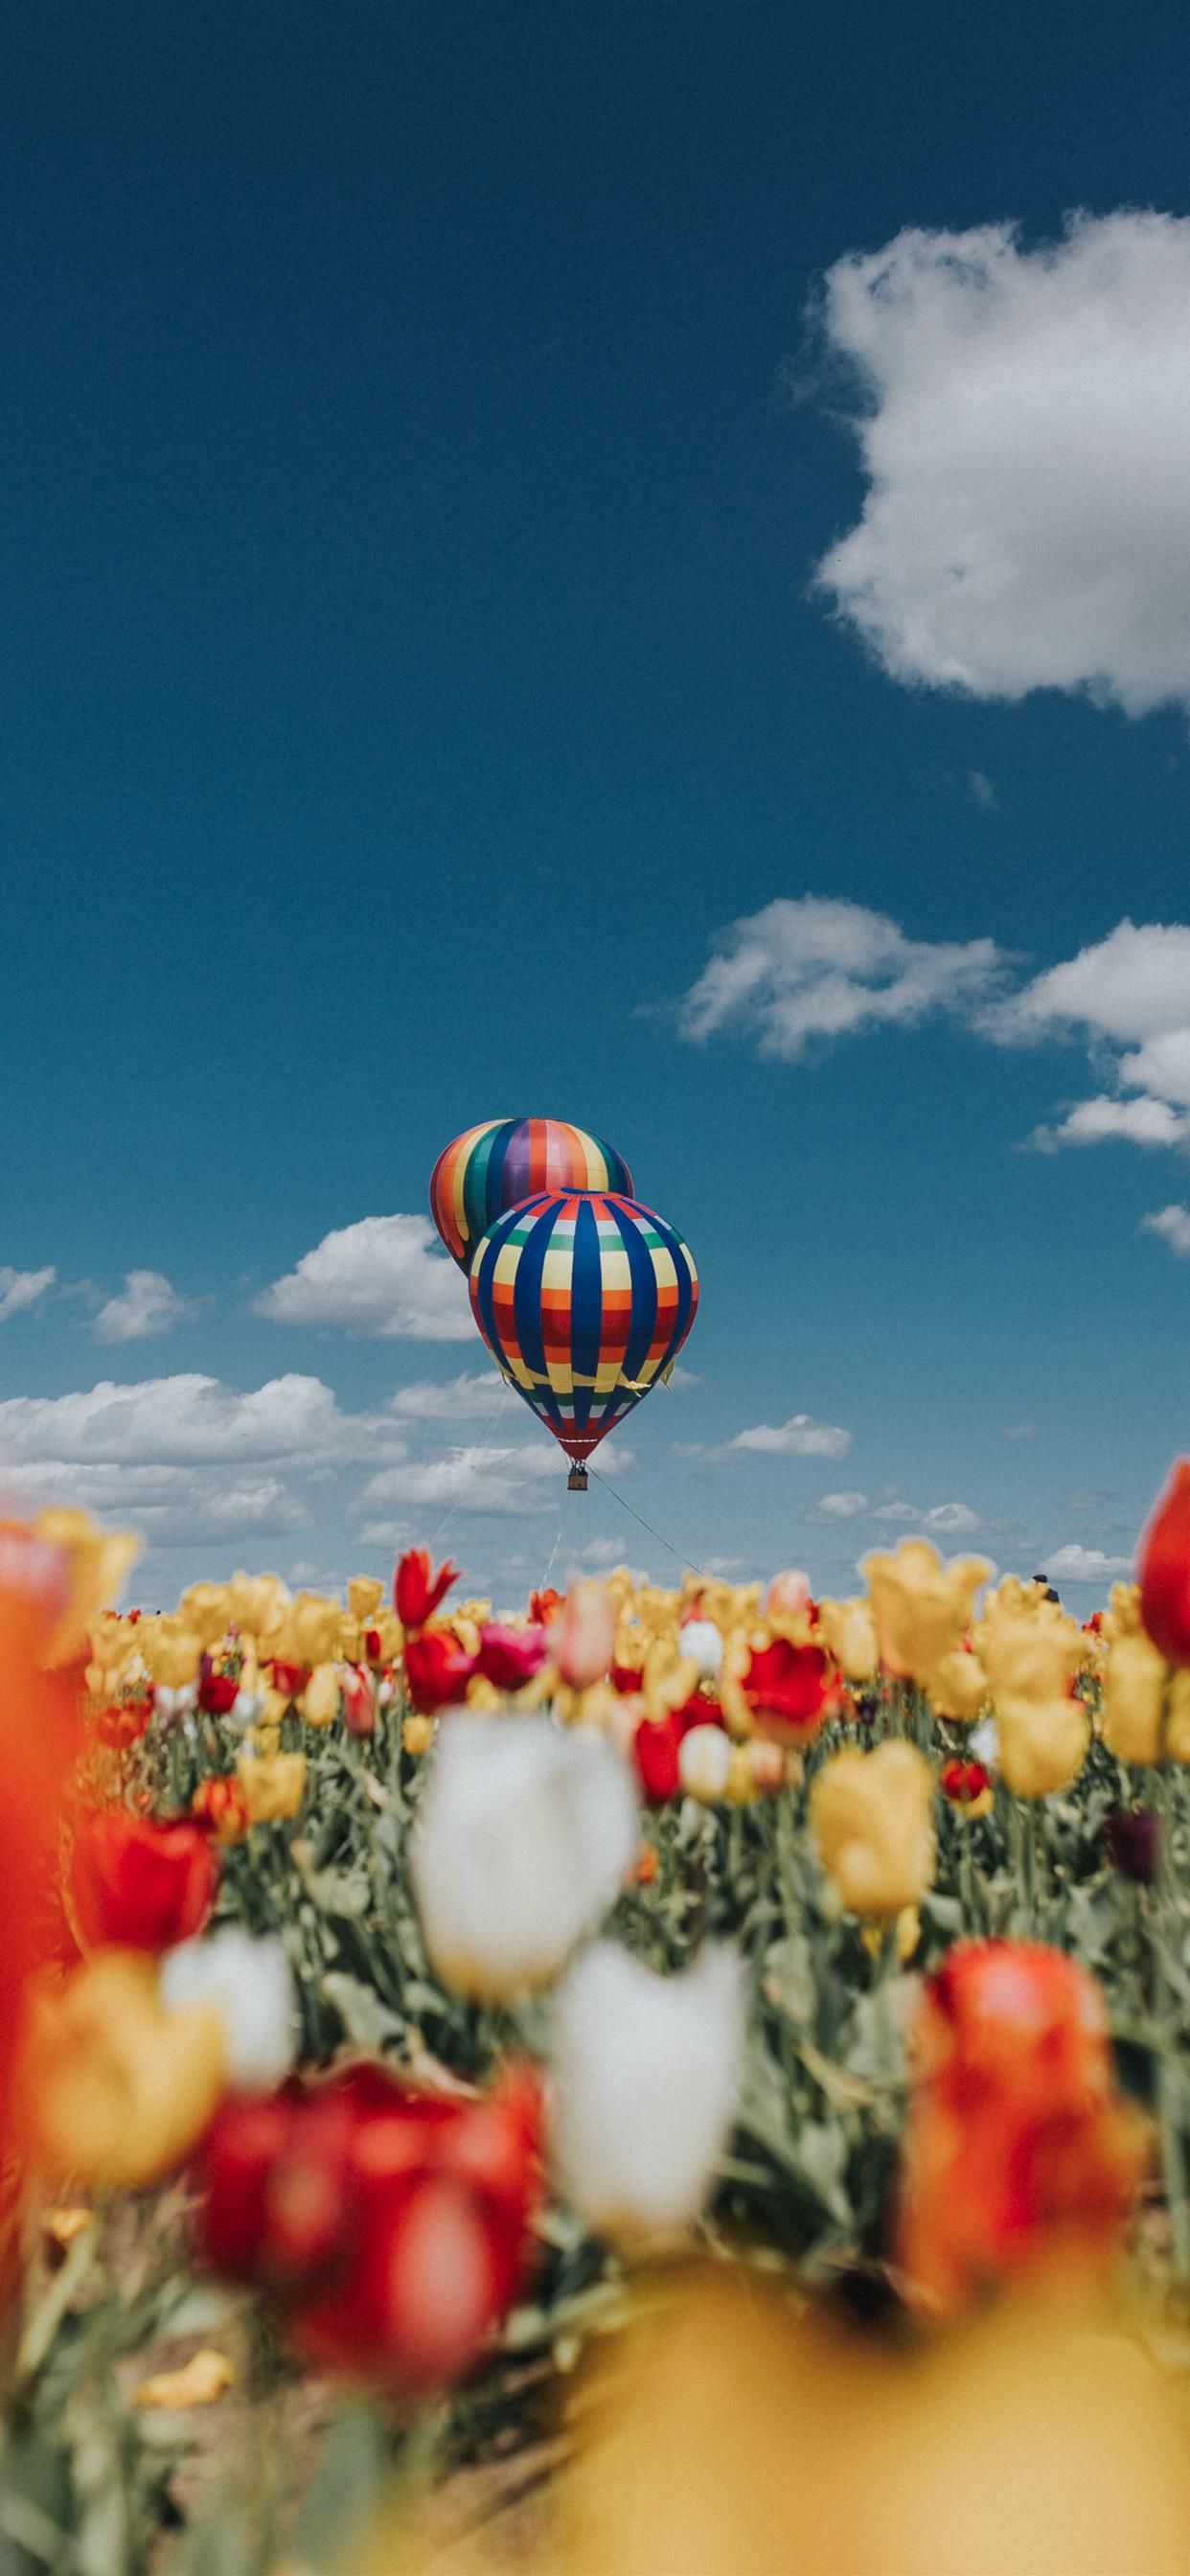 Balloon Over Tulips iPhone X Wallpaper Free Download